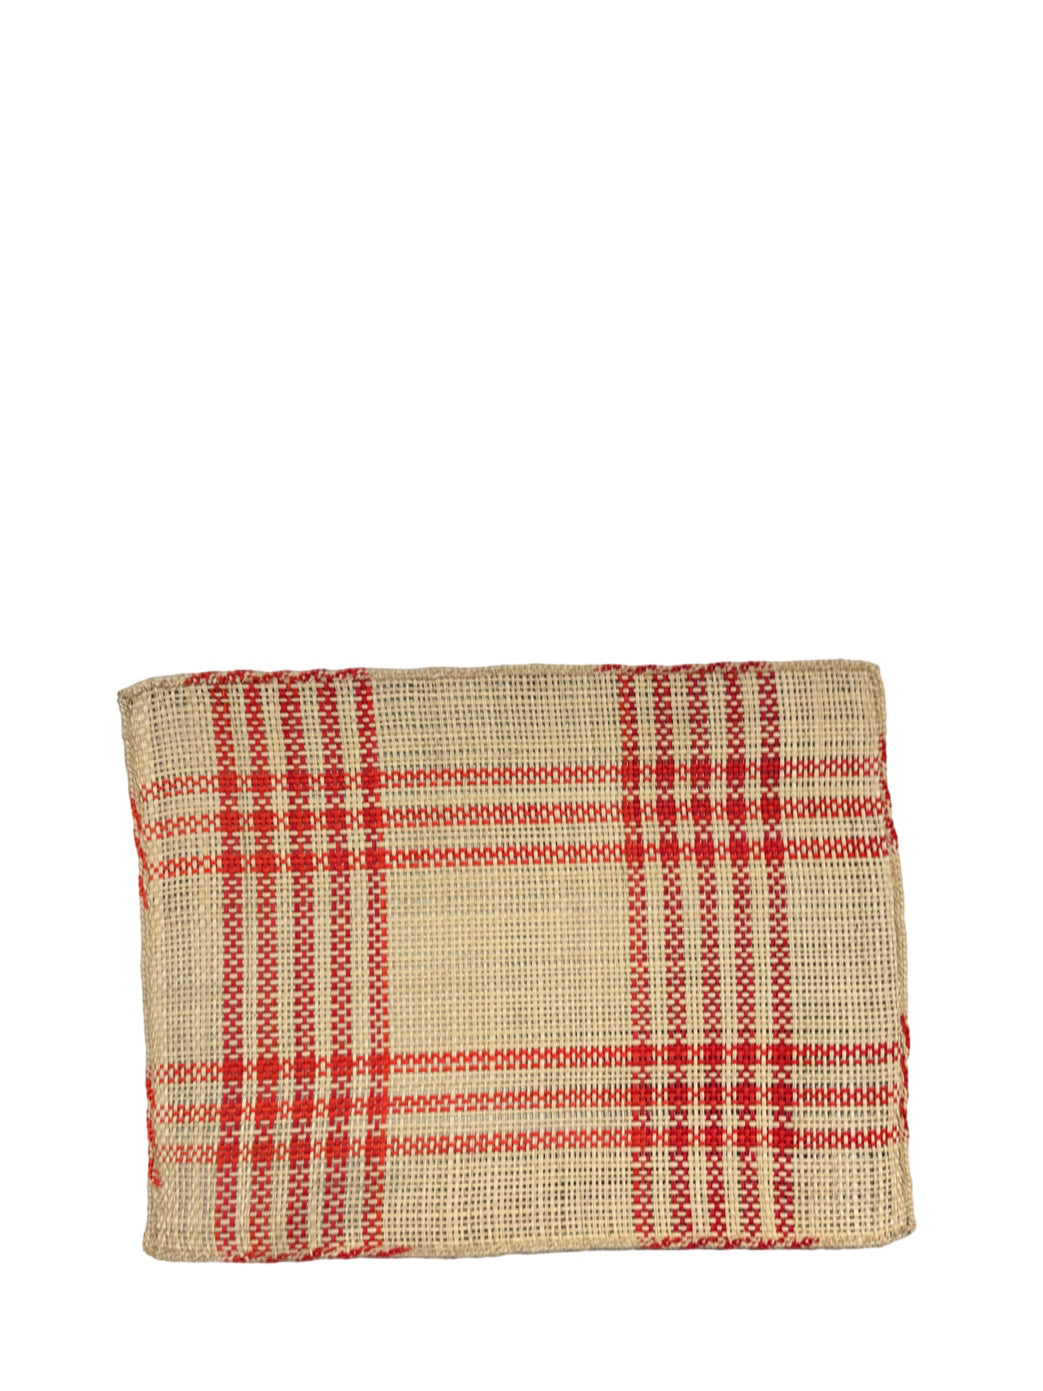 Straw placemat, bright red & natural